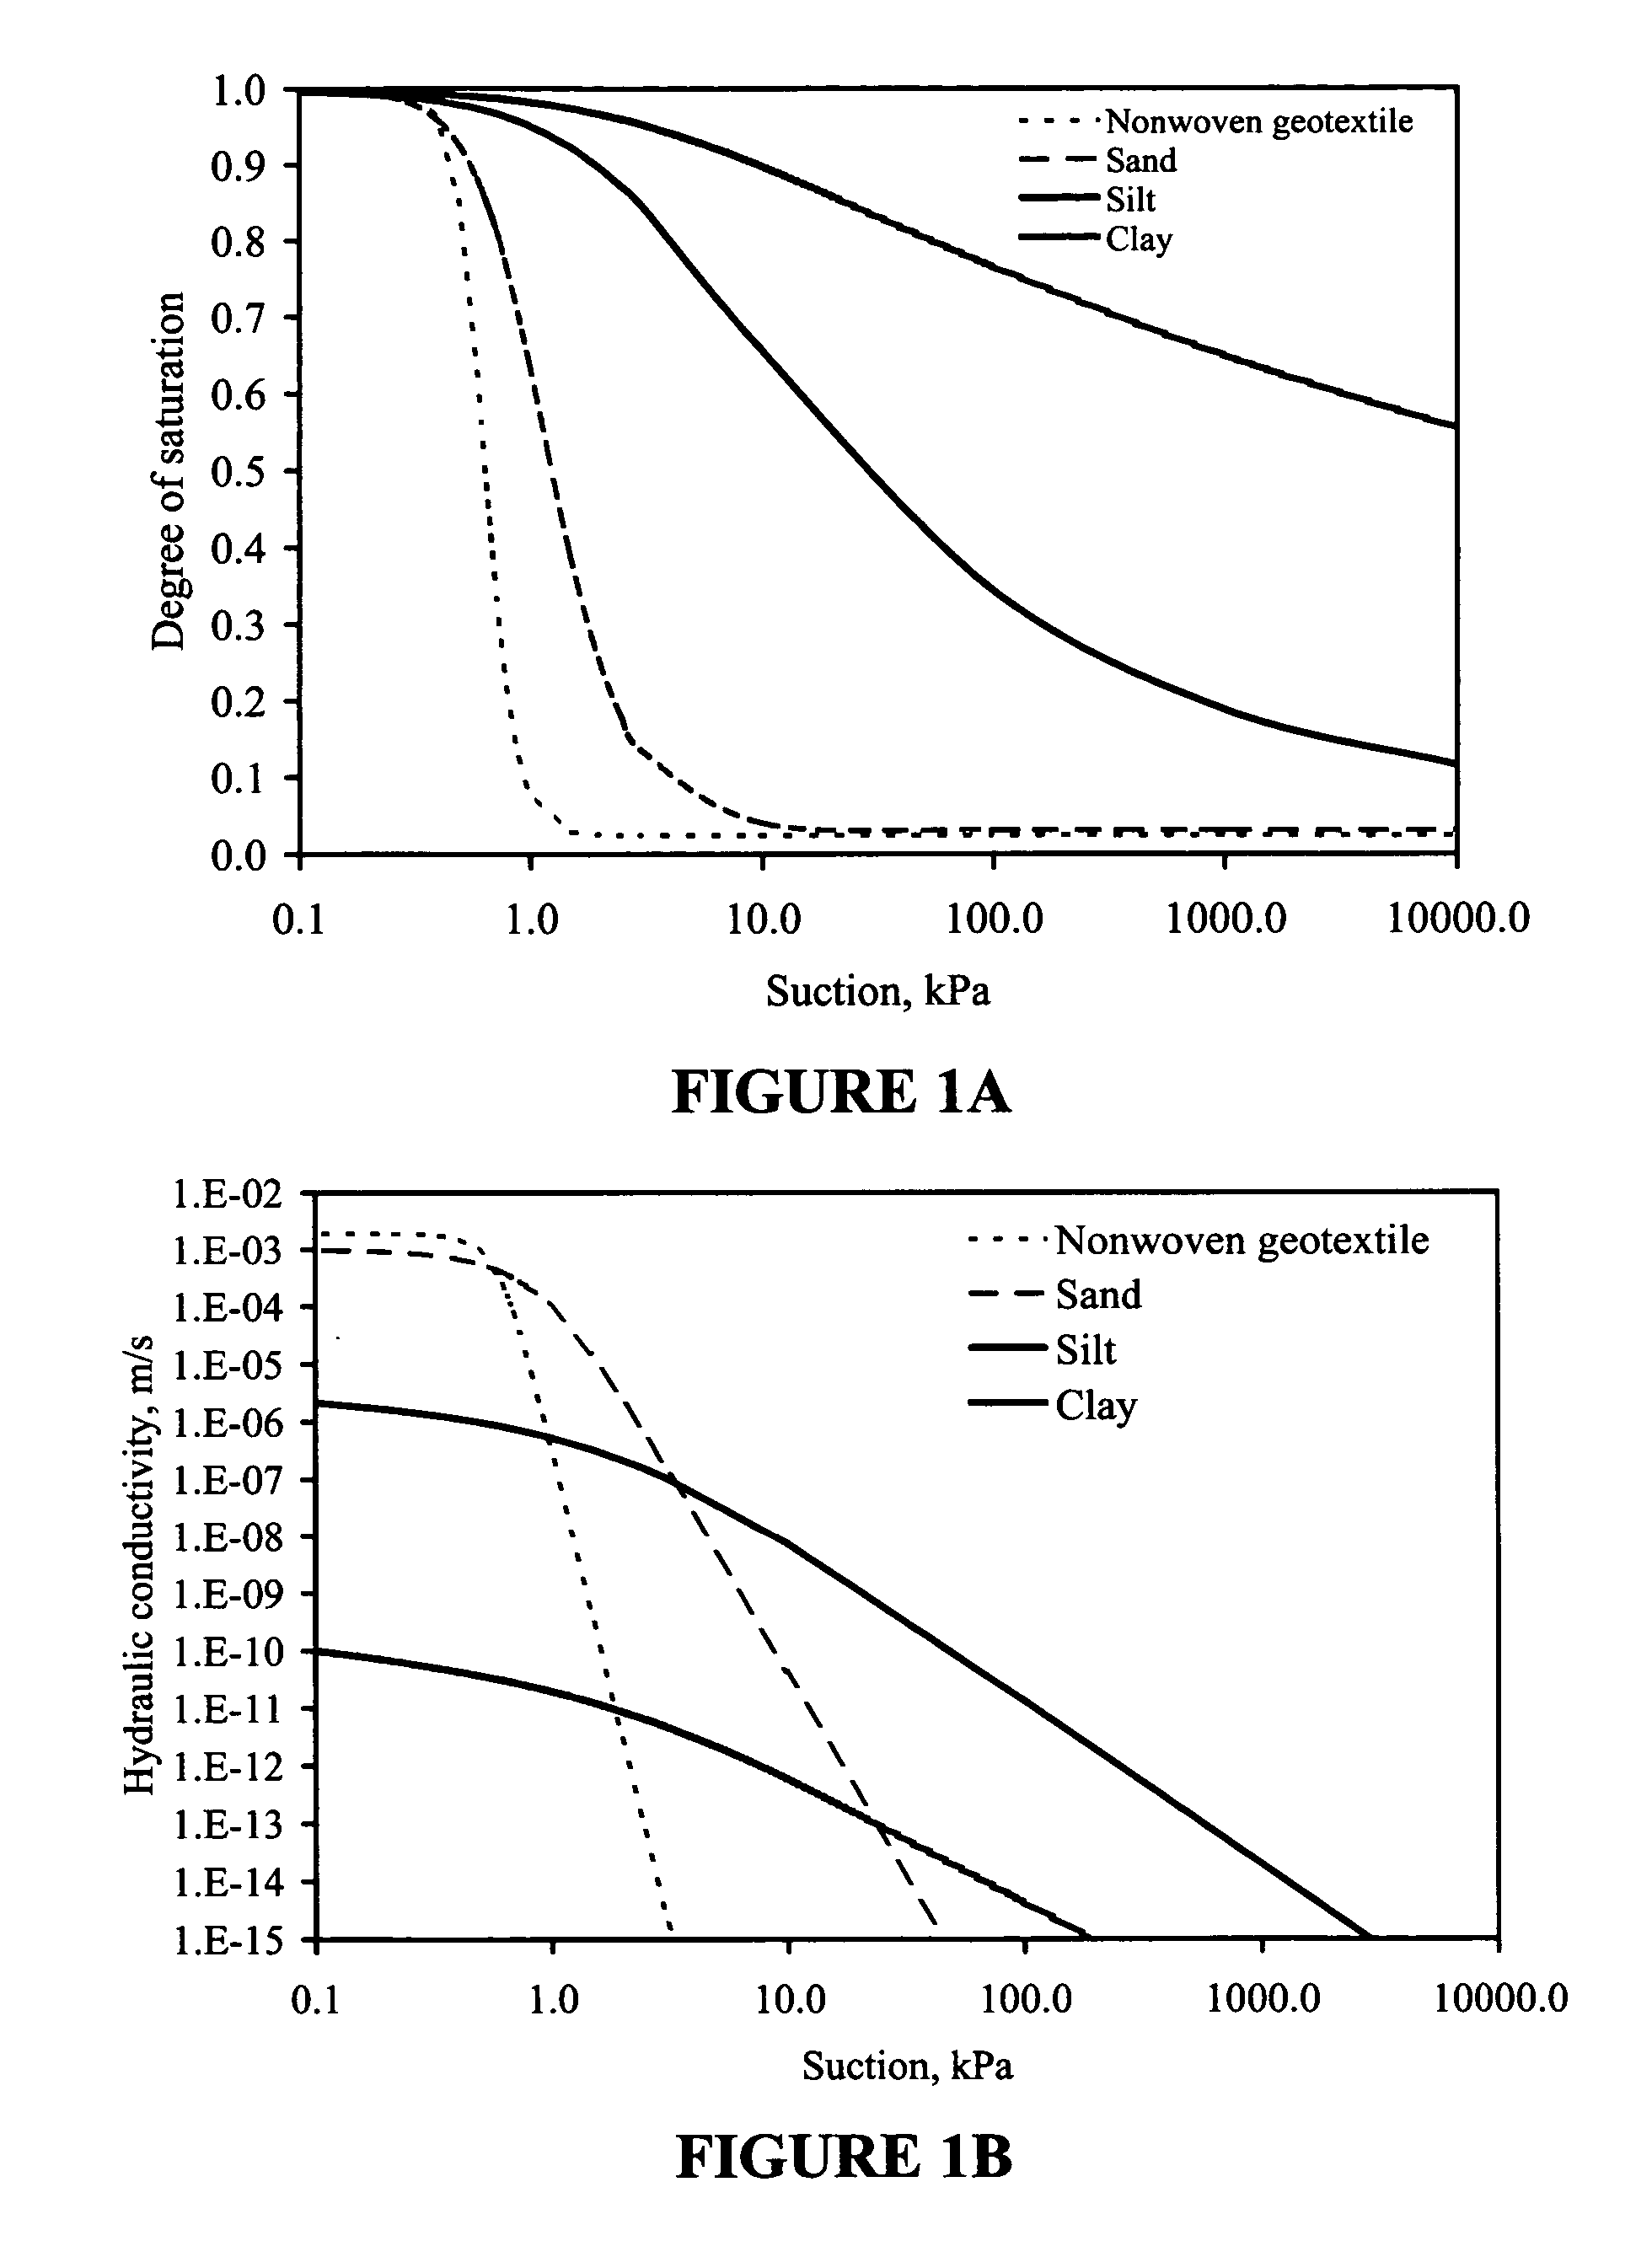 Centrifuge permeameter for unsaturated soils system